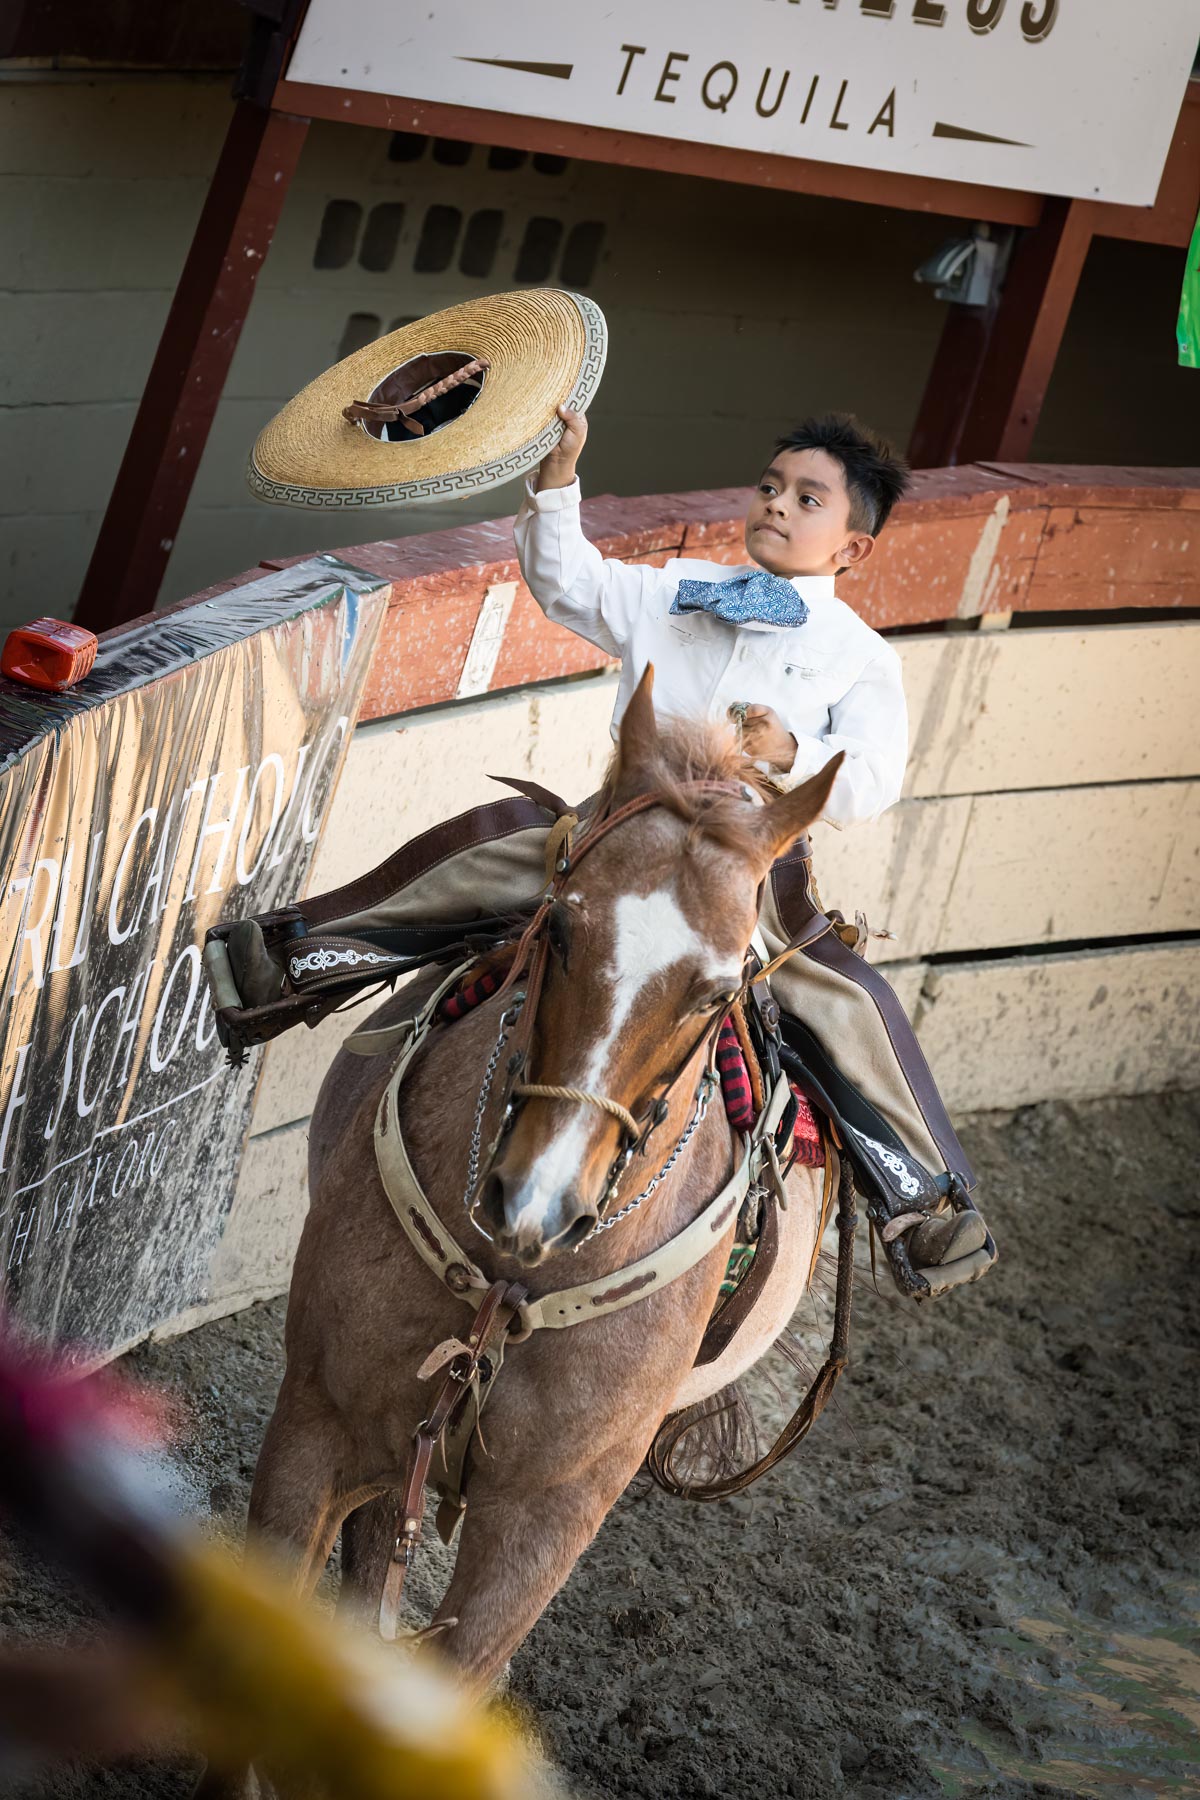 Little boy on horseback holding cowboy hat during Day at Old Mexico for an article on the best Fiesta photos